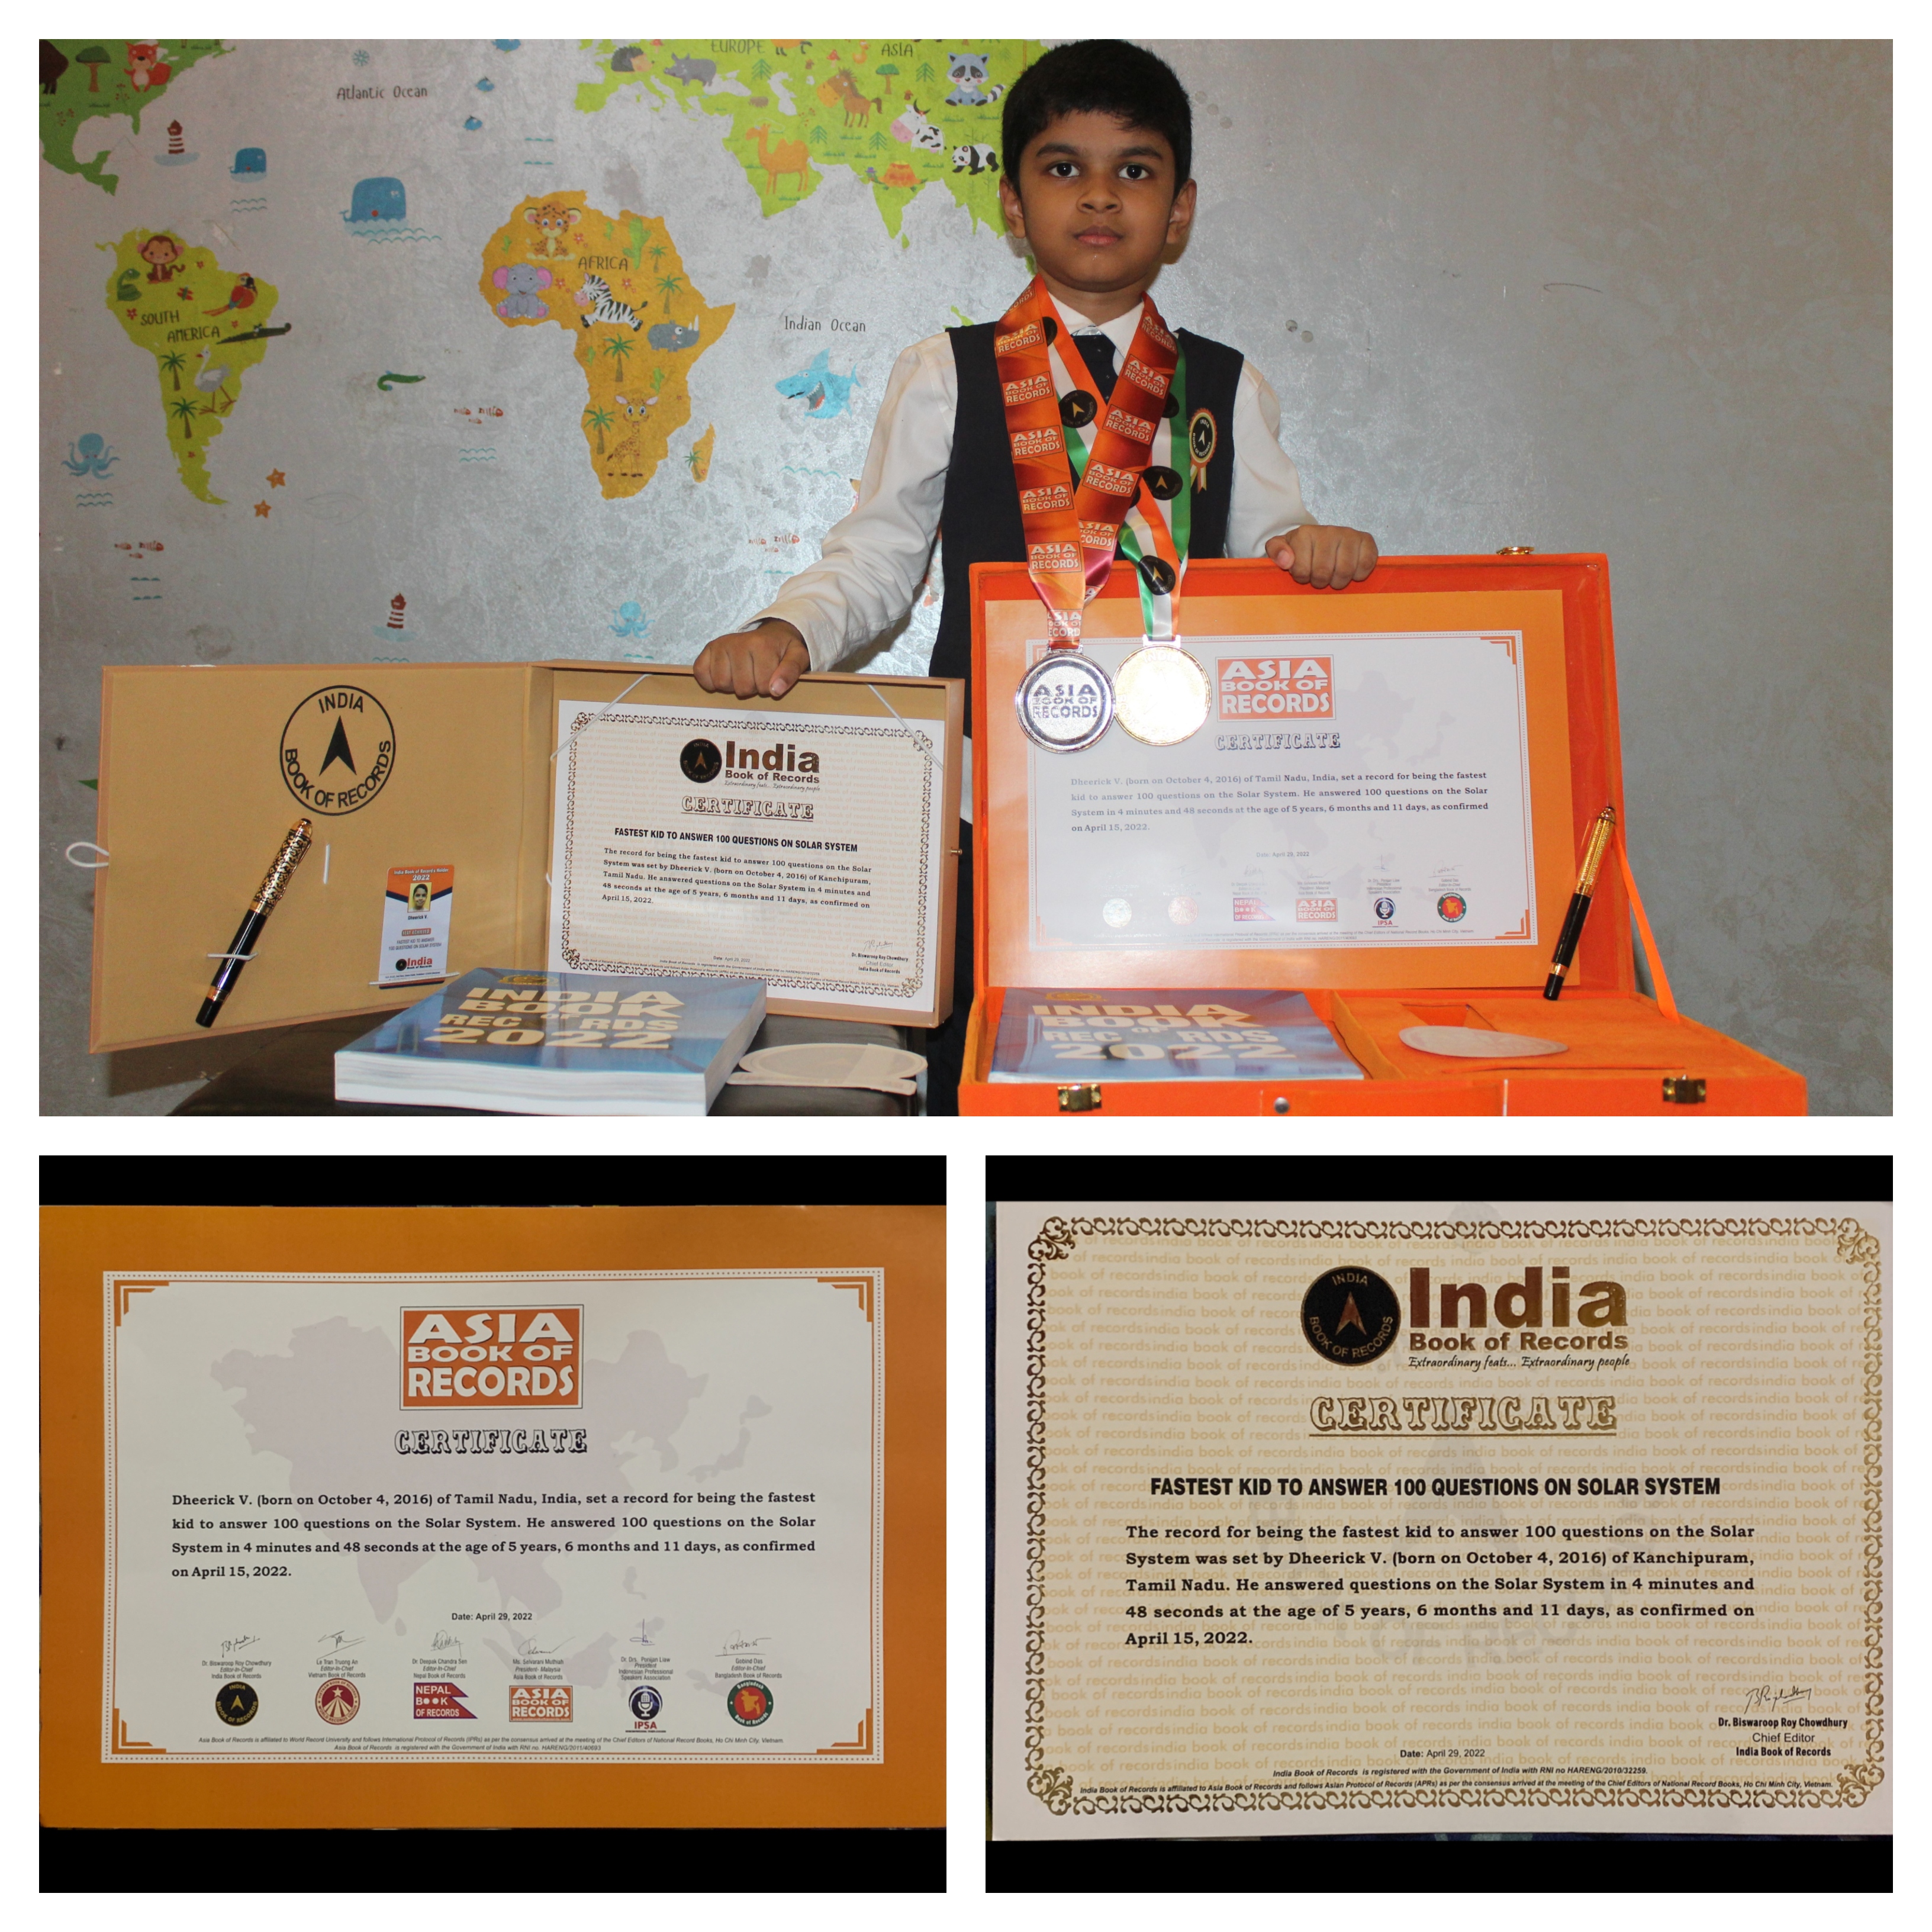 DHEERICK V  - INDIA BOOK OF RECORDS and the ASIA BOOK OF RECORDS